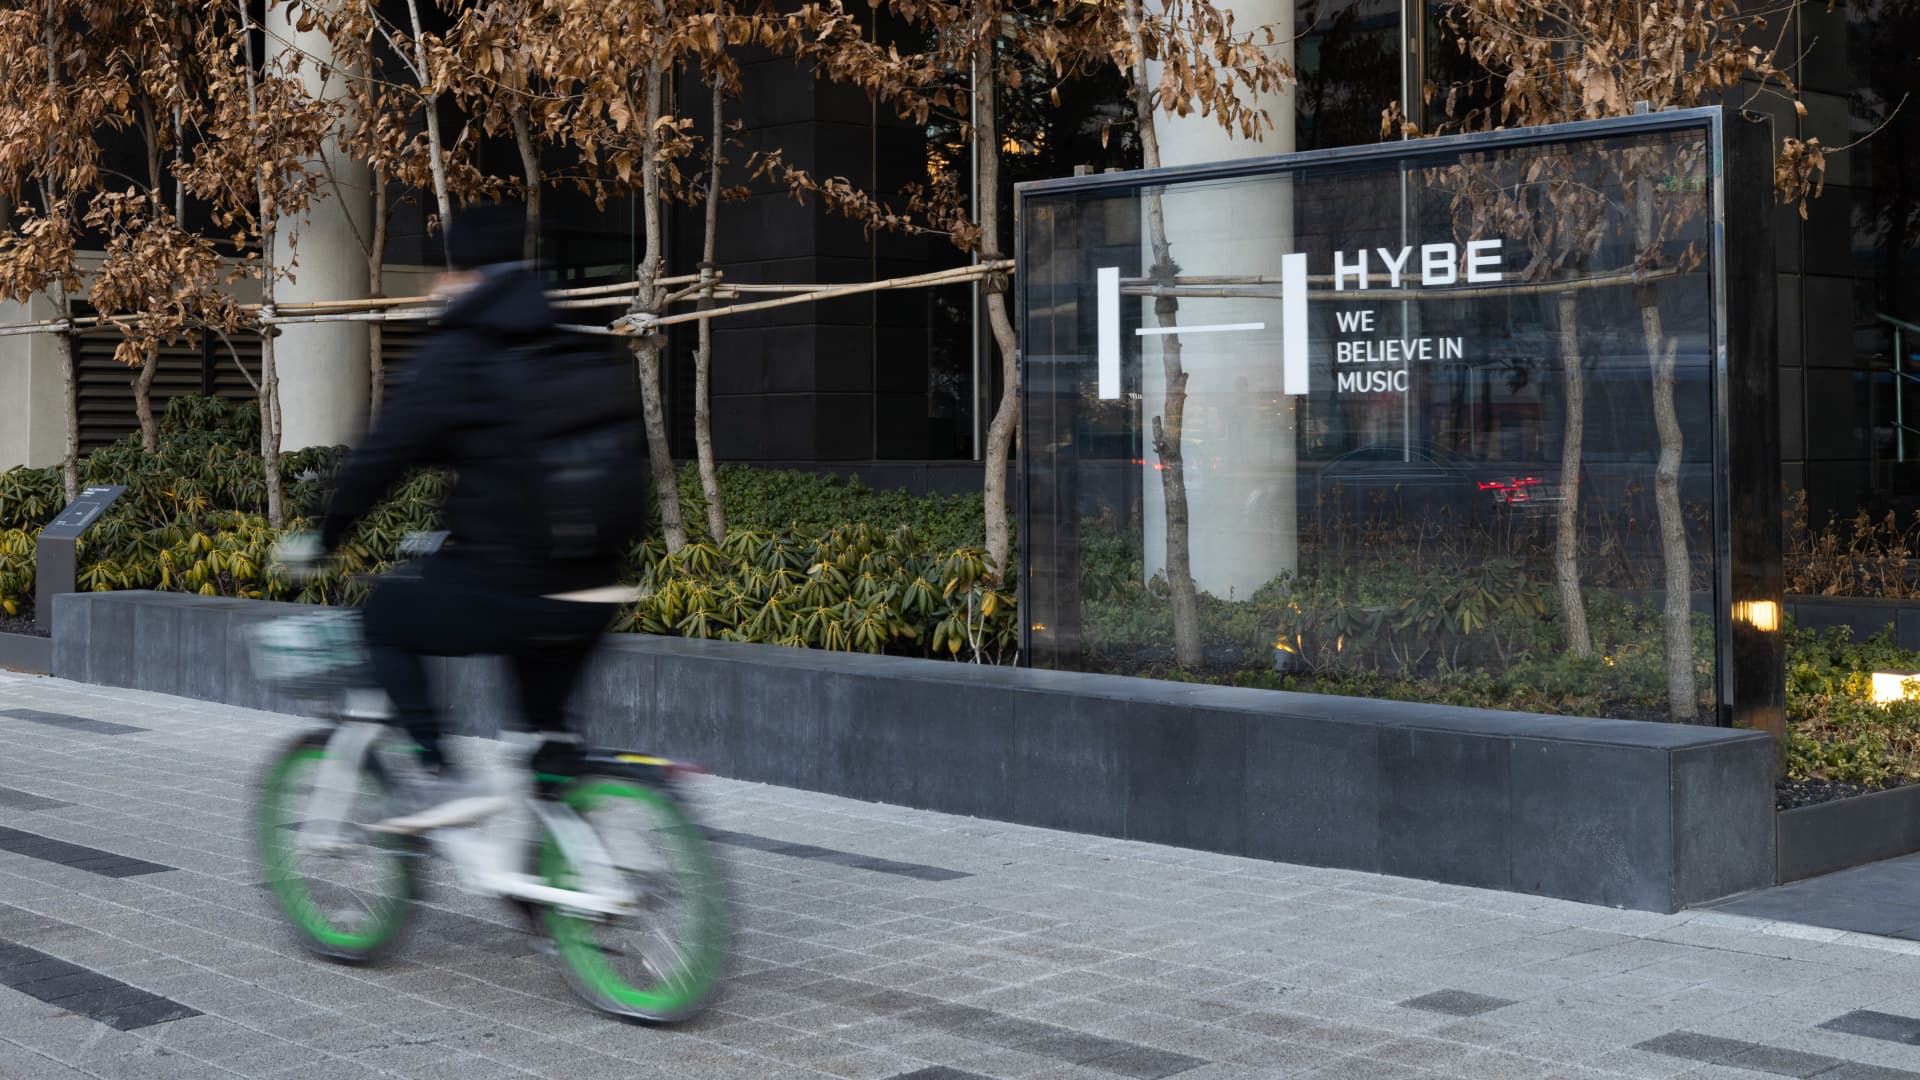 South Korea’s biggest K-pop agency Hybe accuses sublabel executives of breach of rely on